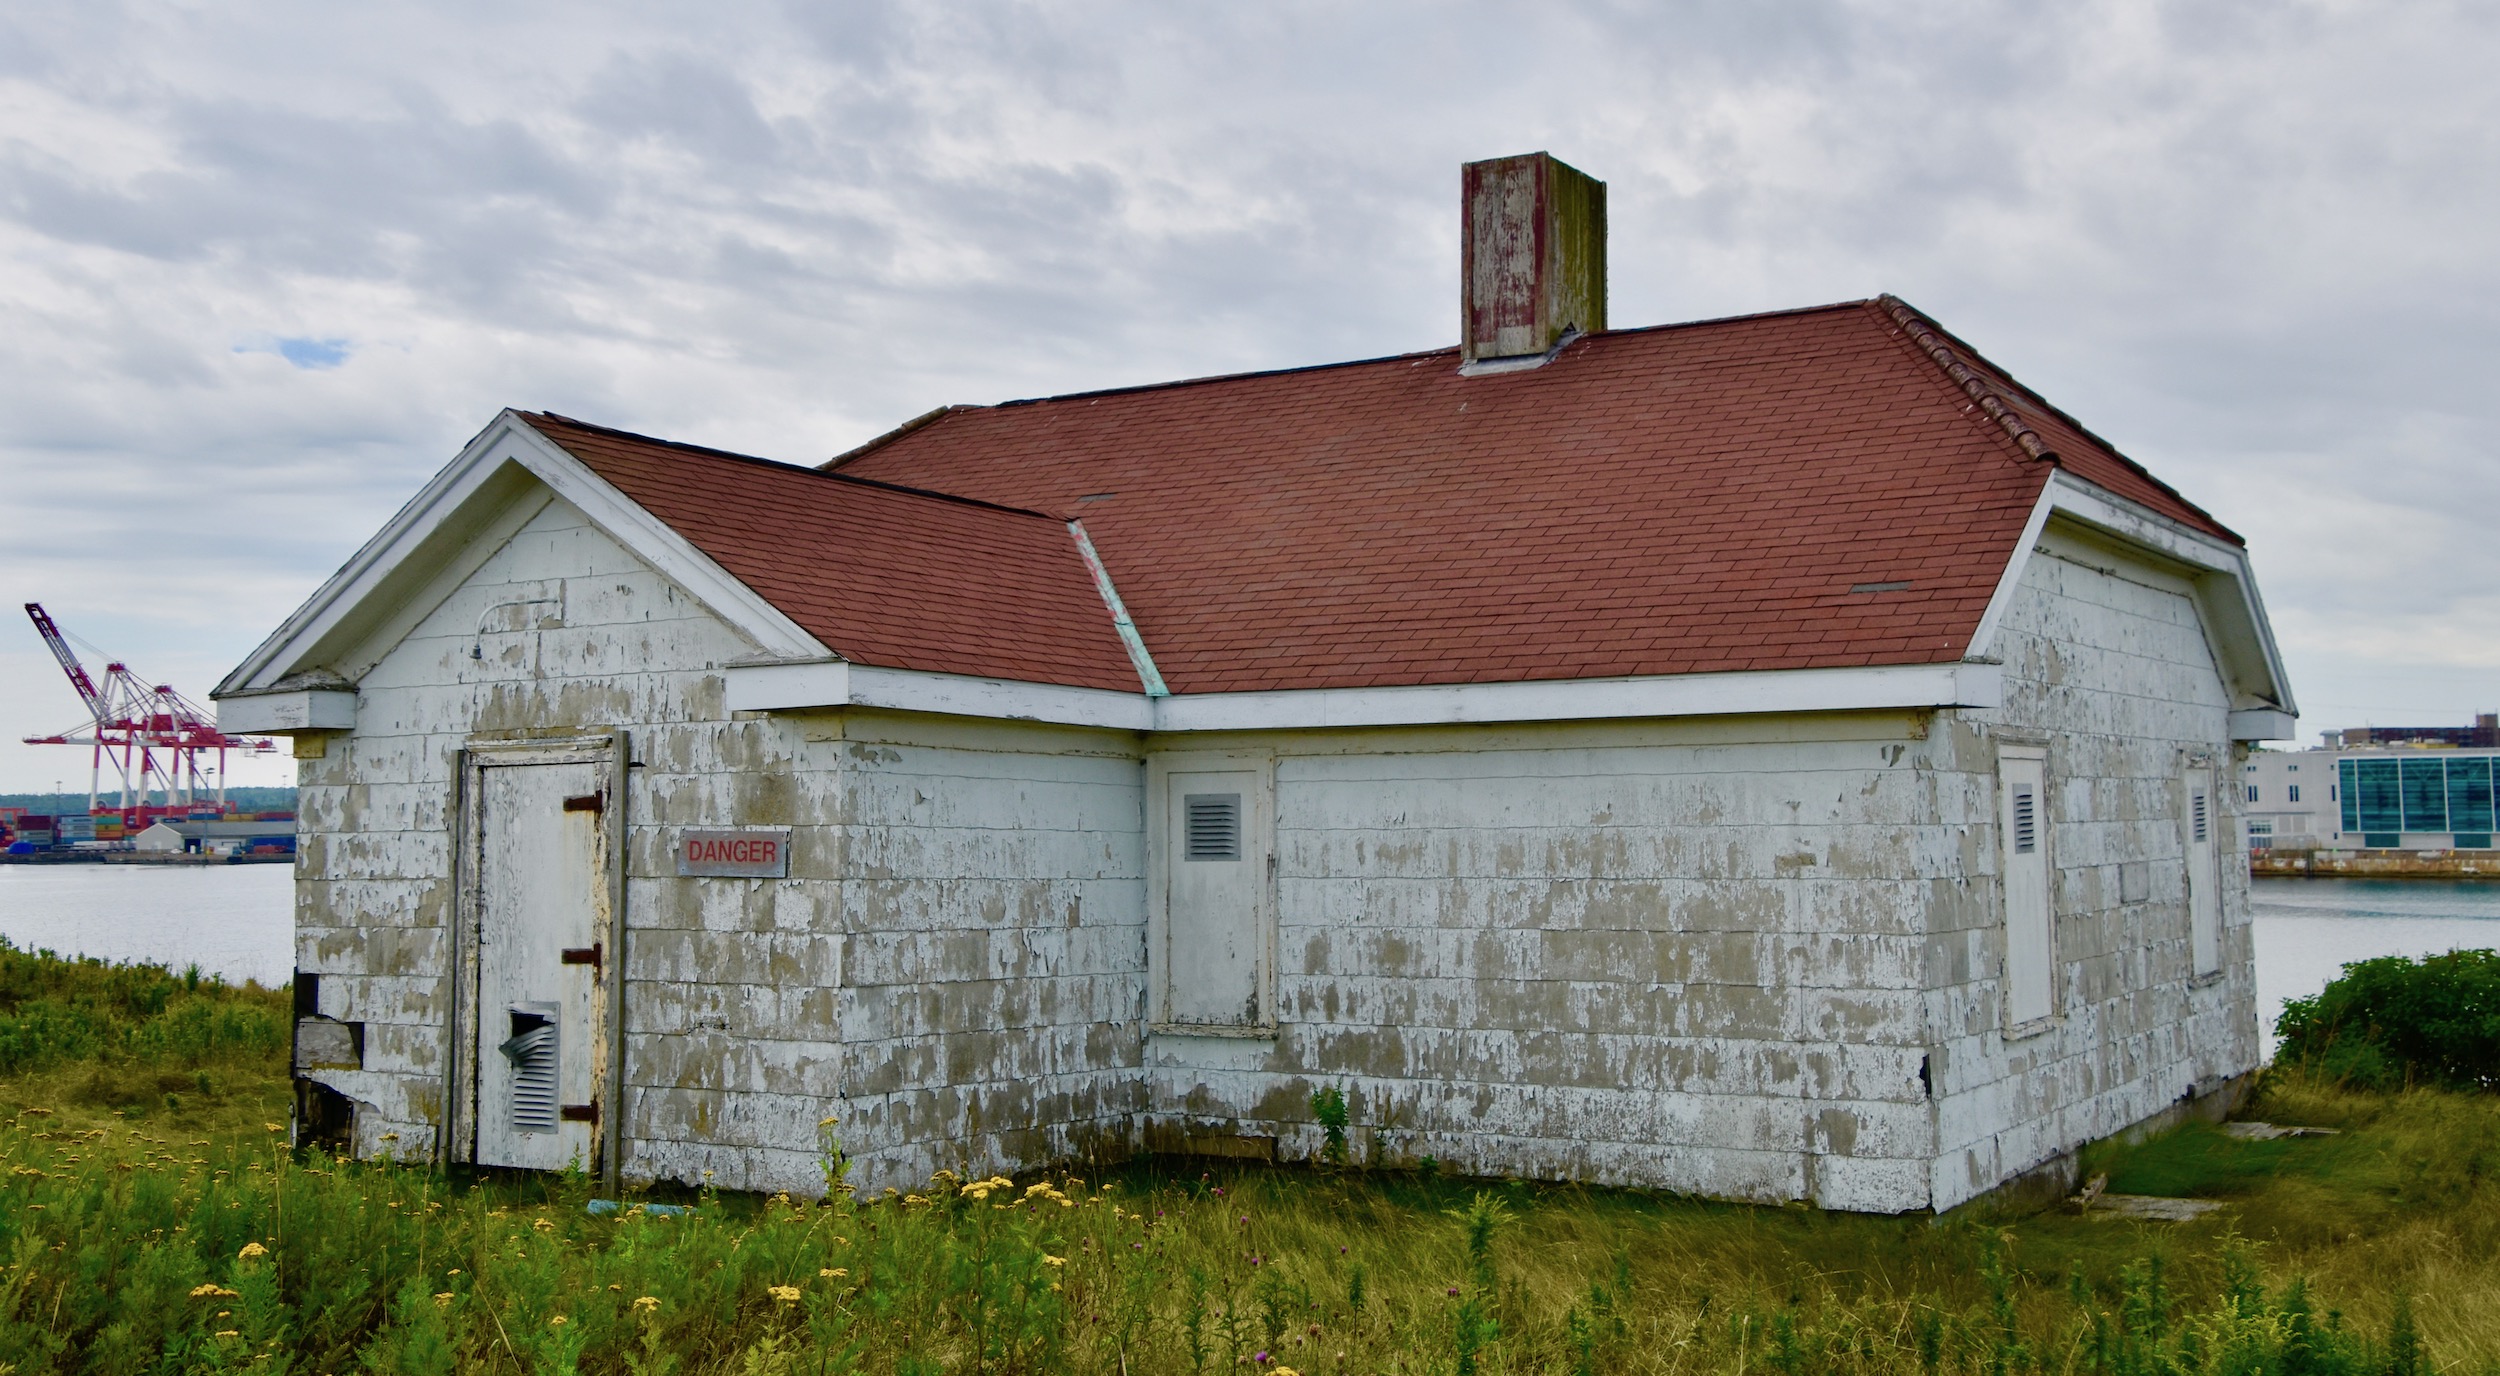  Lighthouse Keeper's House, Georges Island